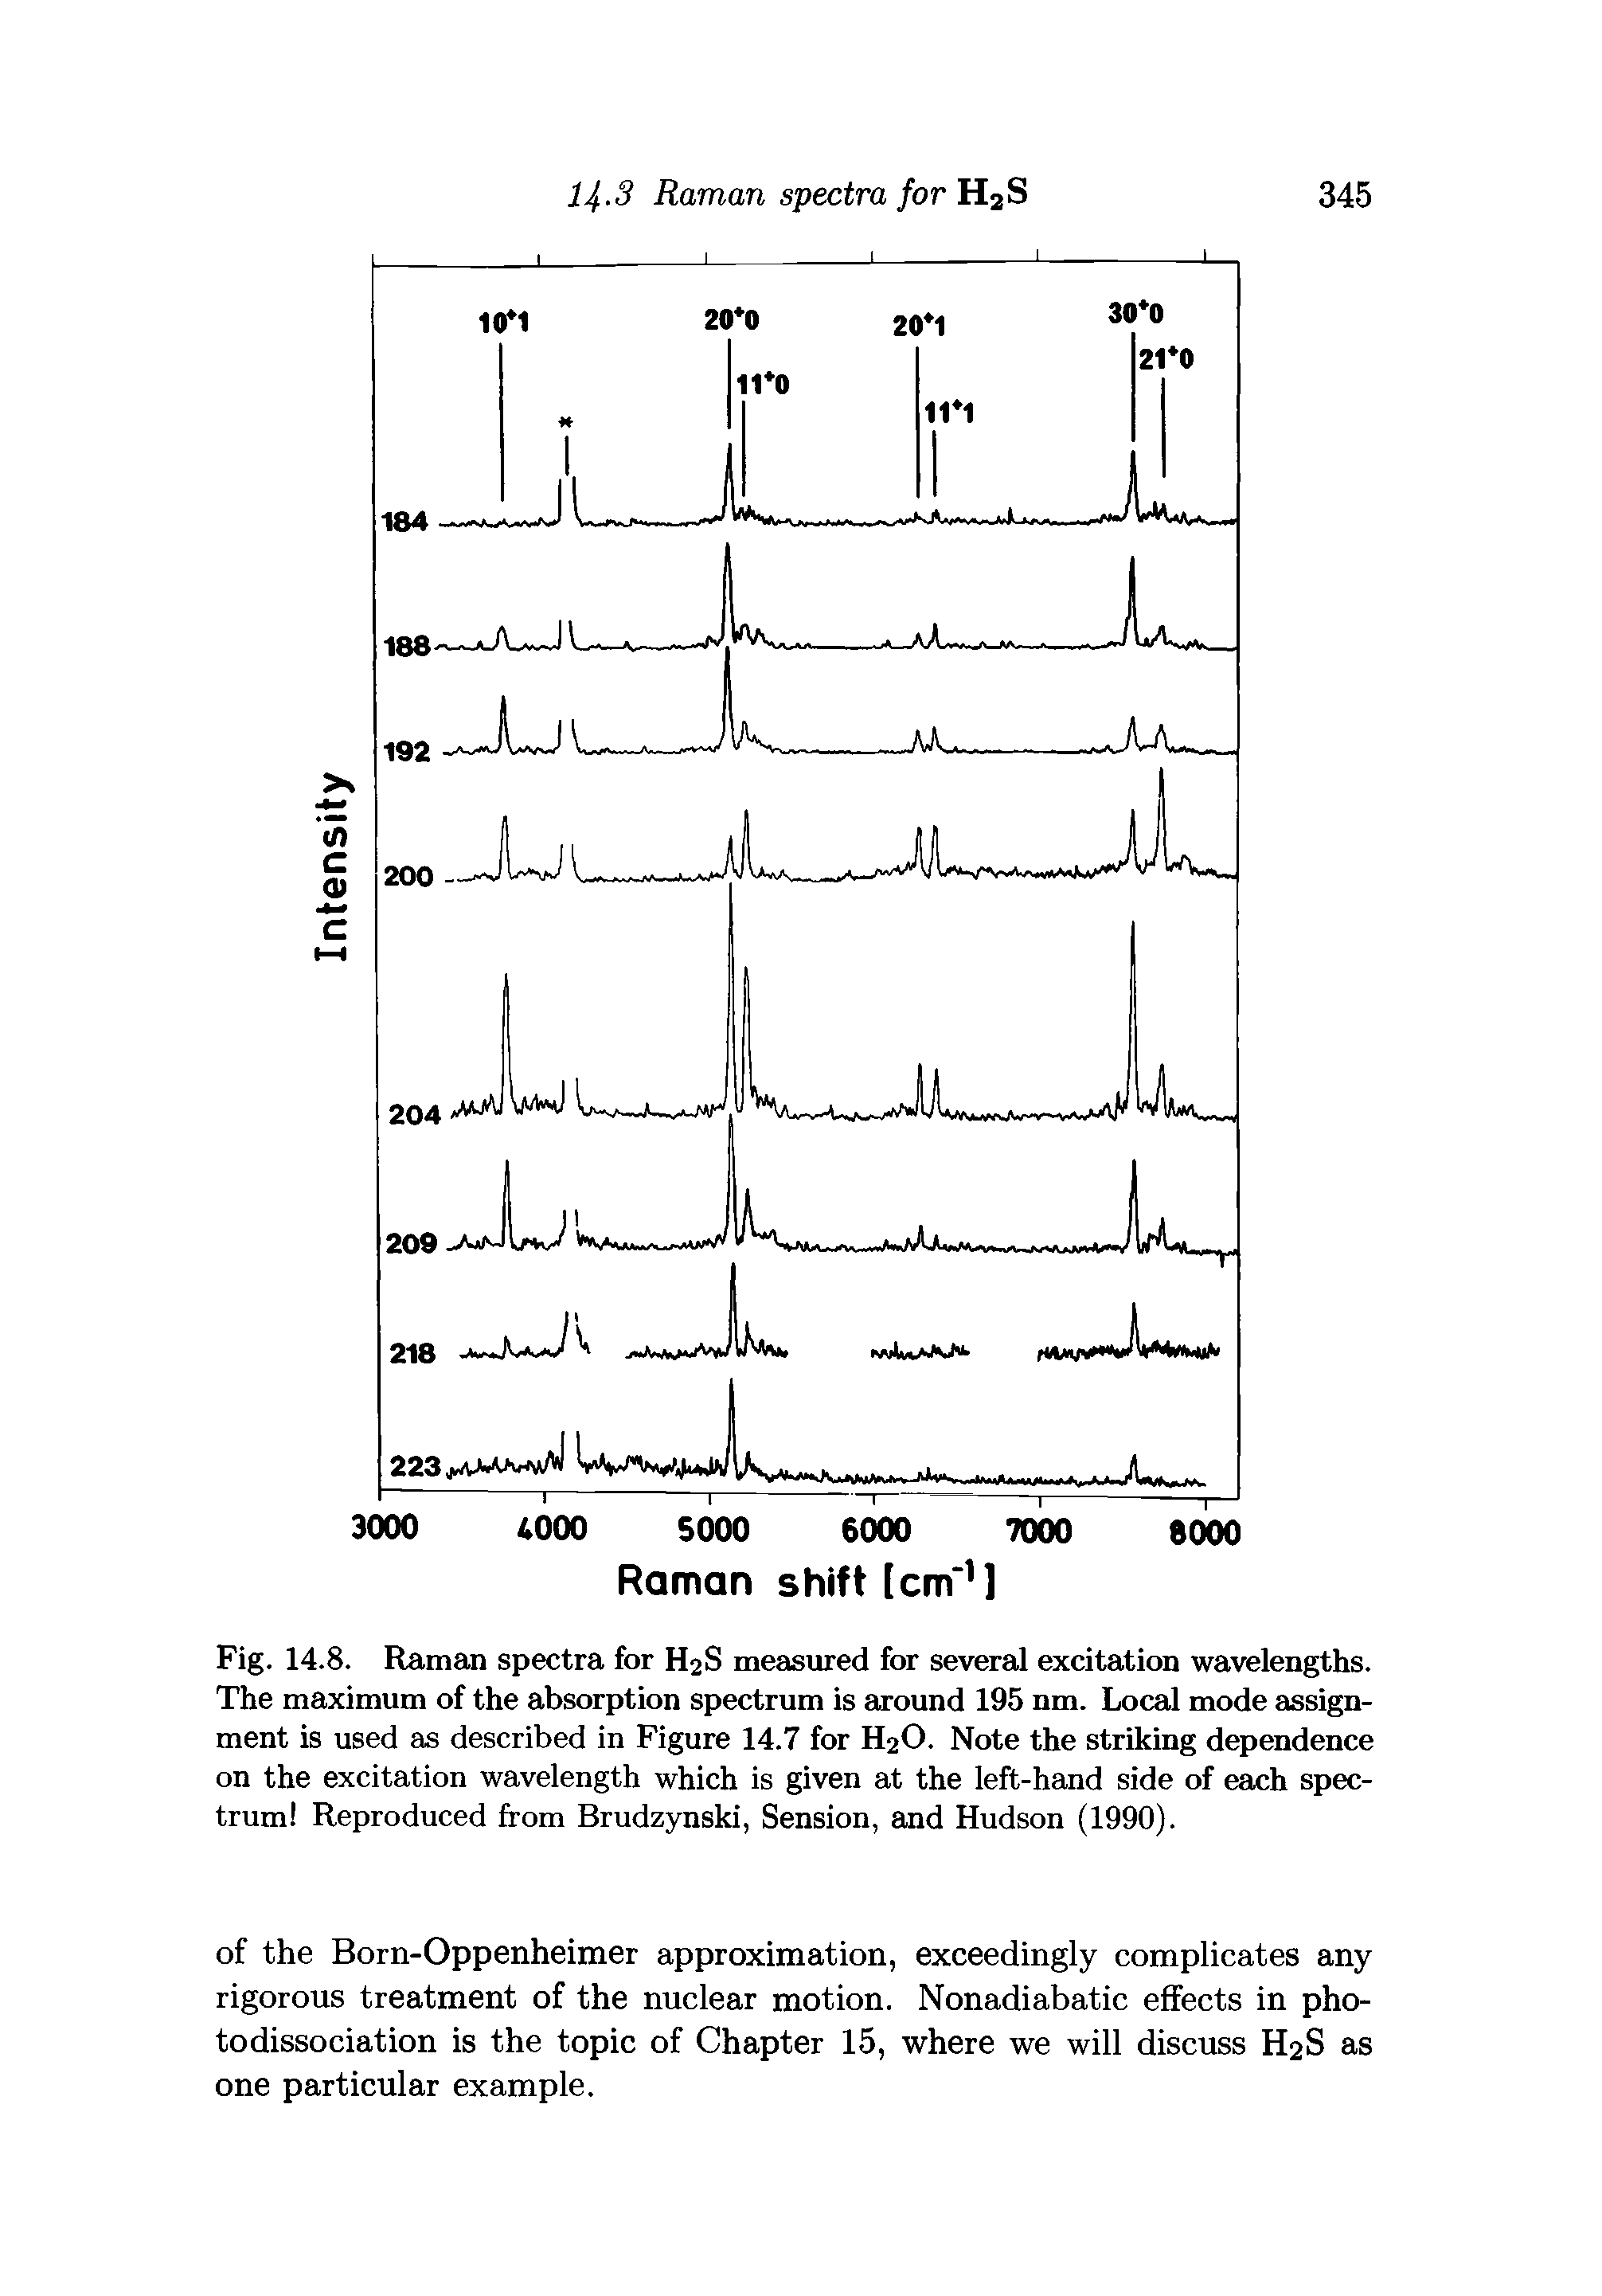 Fig. 14.8. Raman spectra for H2S measured for several excitation wavelengths. The maximum of the absorption spectrum is around 195 nm. Local mode assignment is used as described in Figure 14.7 for H20. Note the striking dependence on the excitation wavelength which is given at the left-hand side of each spectrum Reproduced from Brudzynski, Sension, and Hudson (1990).